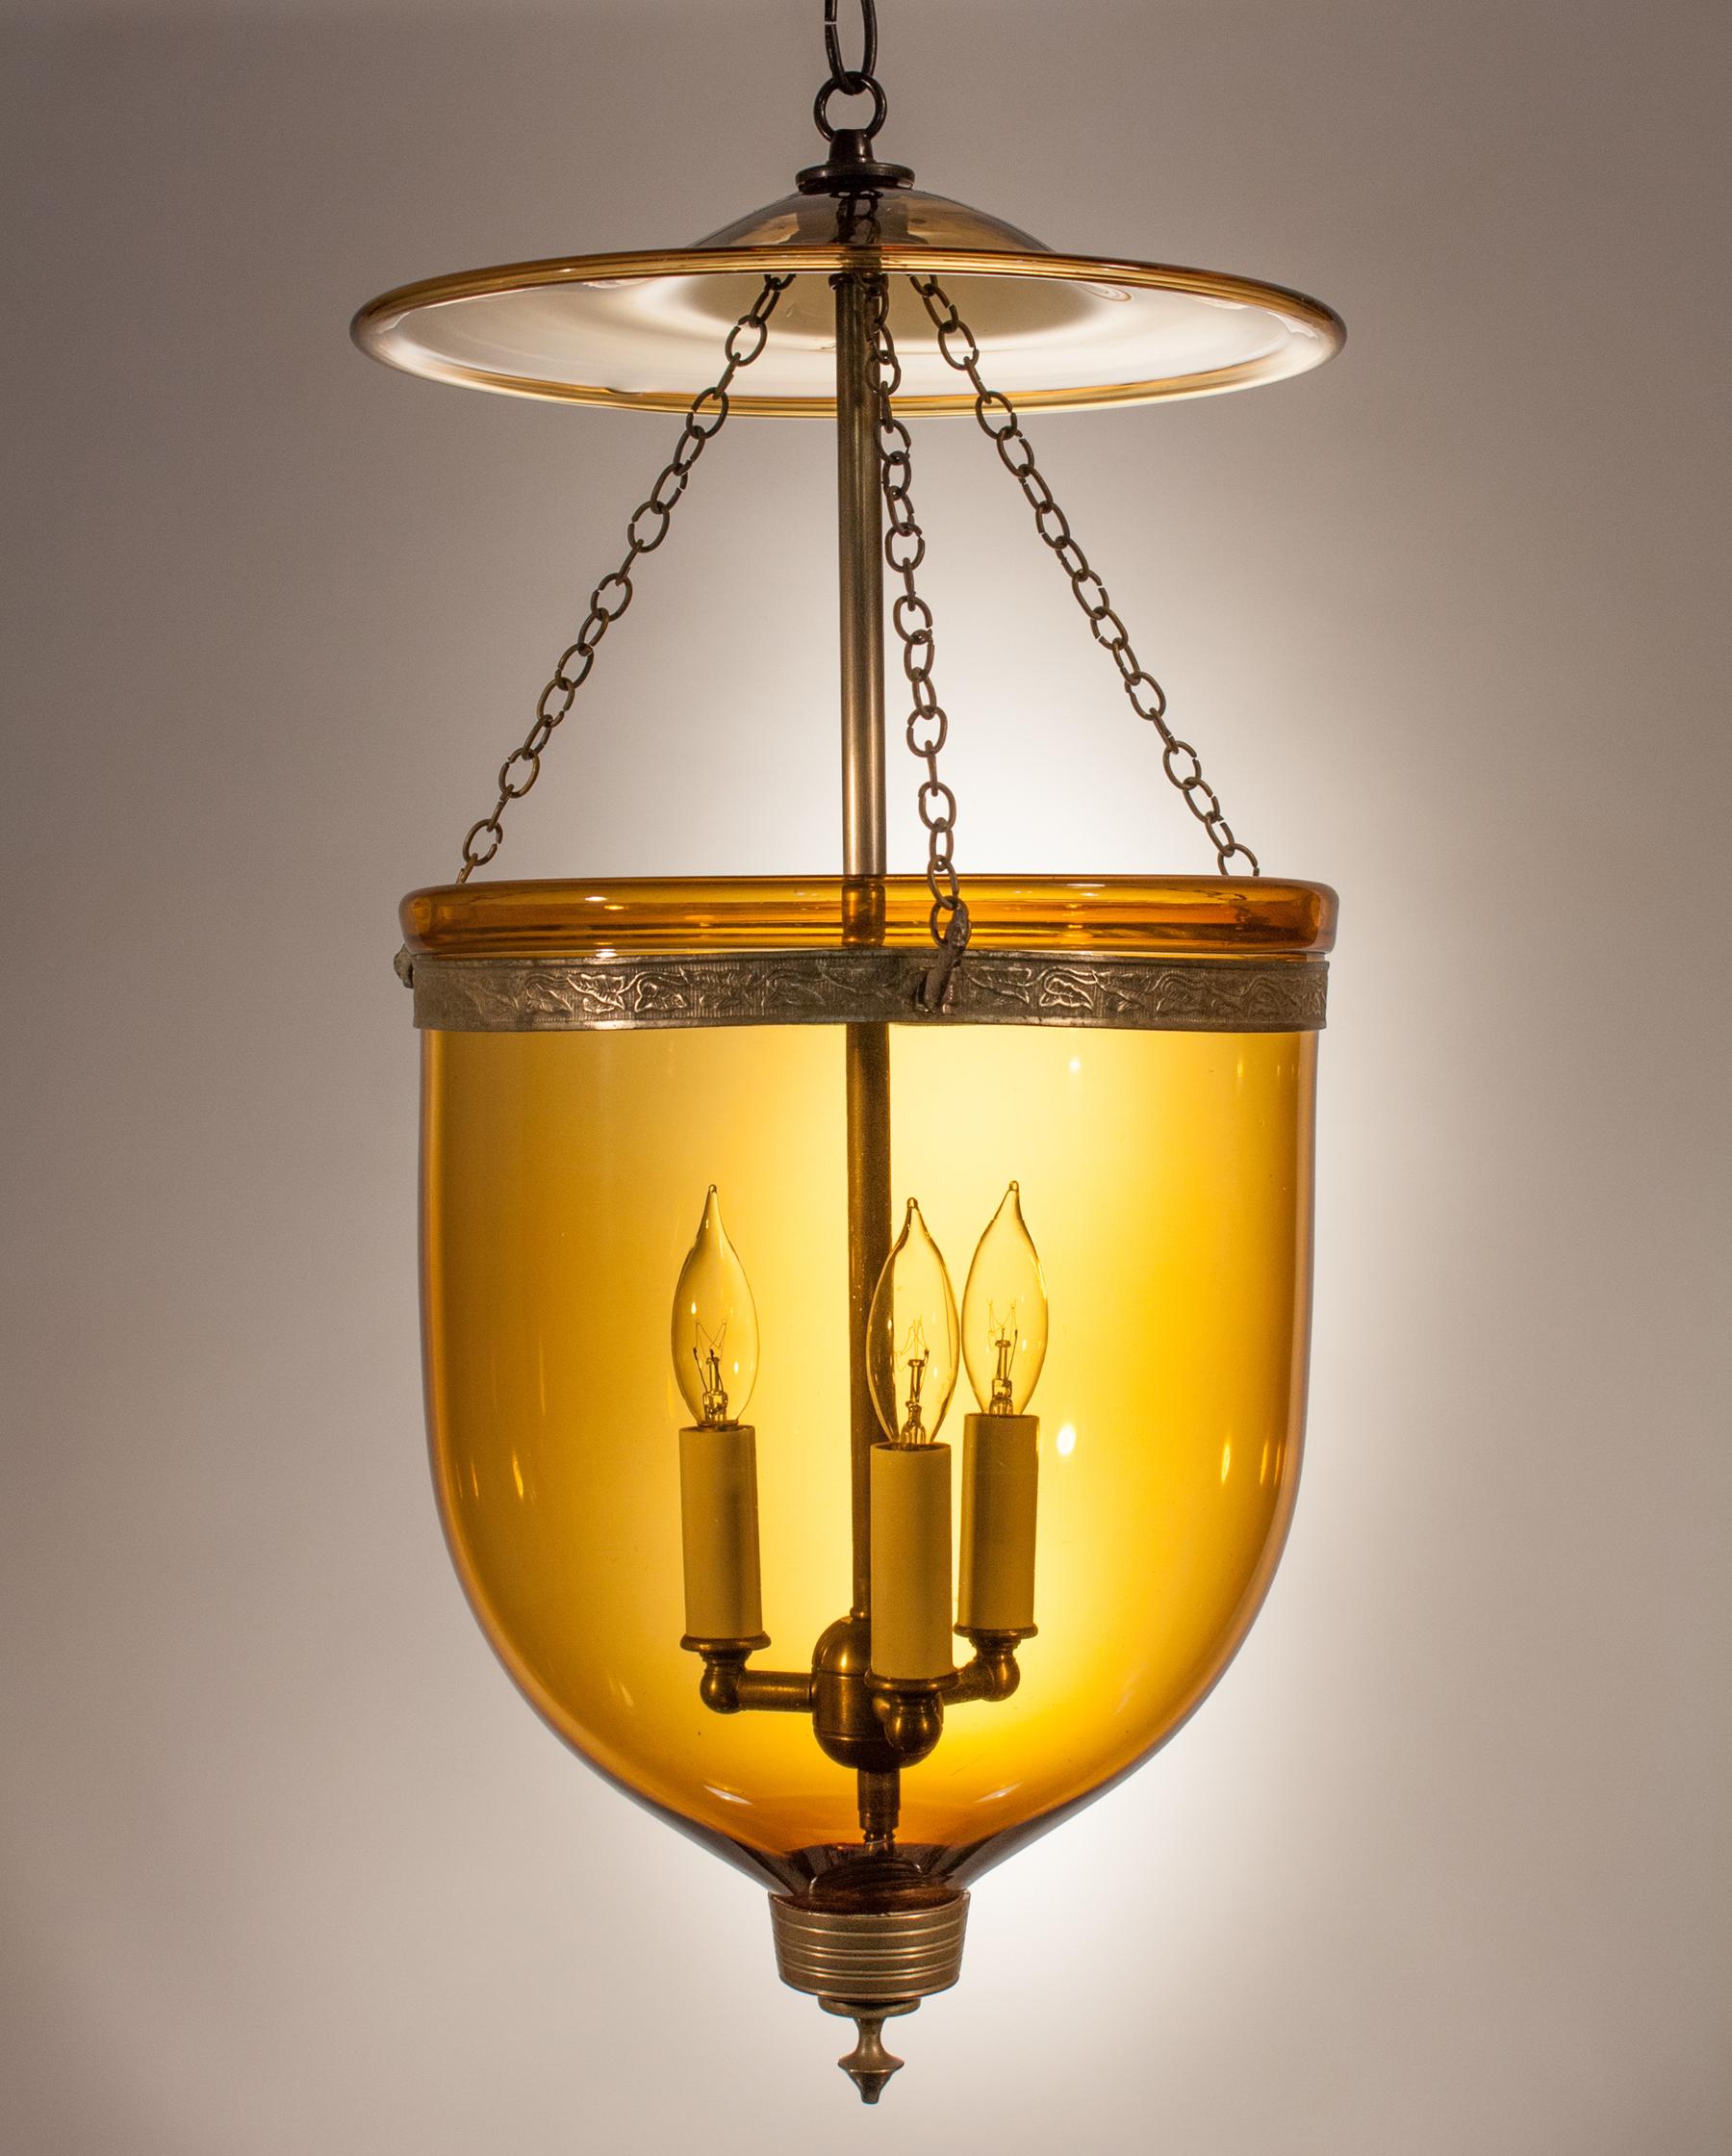 A rich amber-colored hand blown glass bell jar lantern with its original embossed brass band, finial and glass smoke bell. Chains are replaced, but originals are available. At first used with candles, this circa 1880 lantern has been newly re-wired